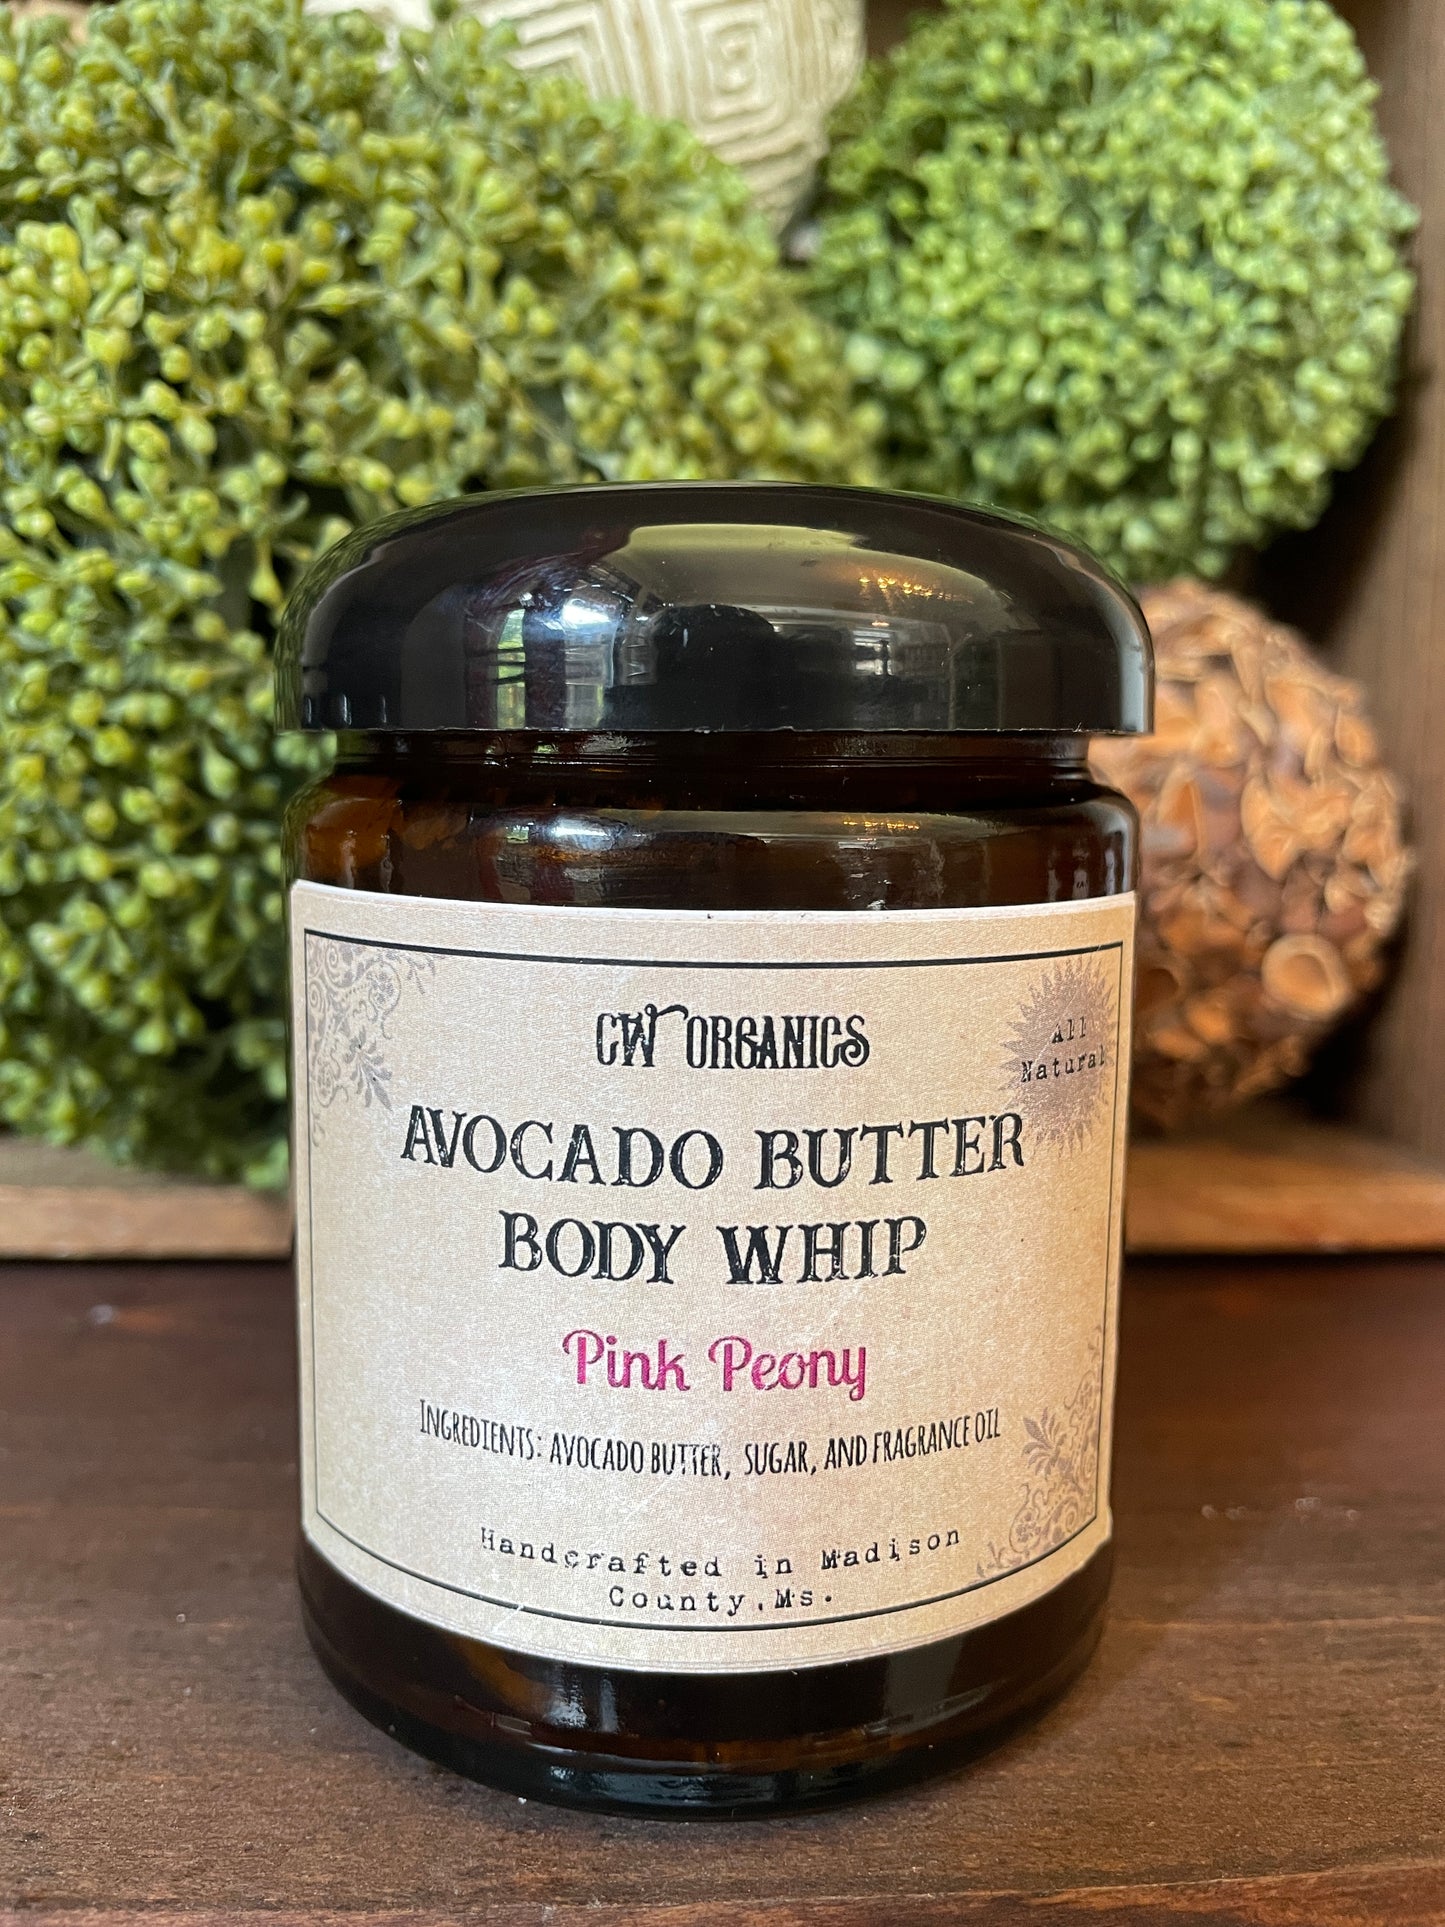 Avocado Butter Body Whip - Pink Peony